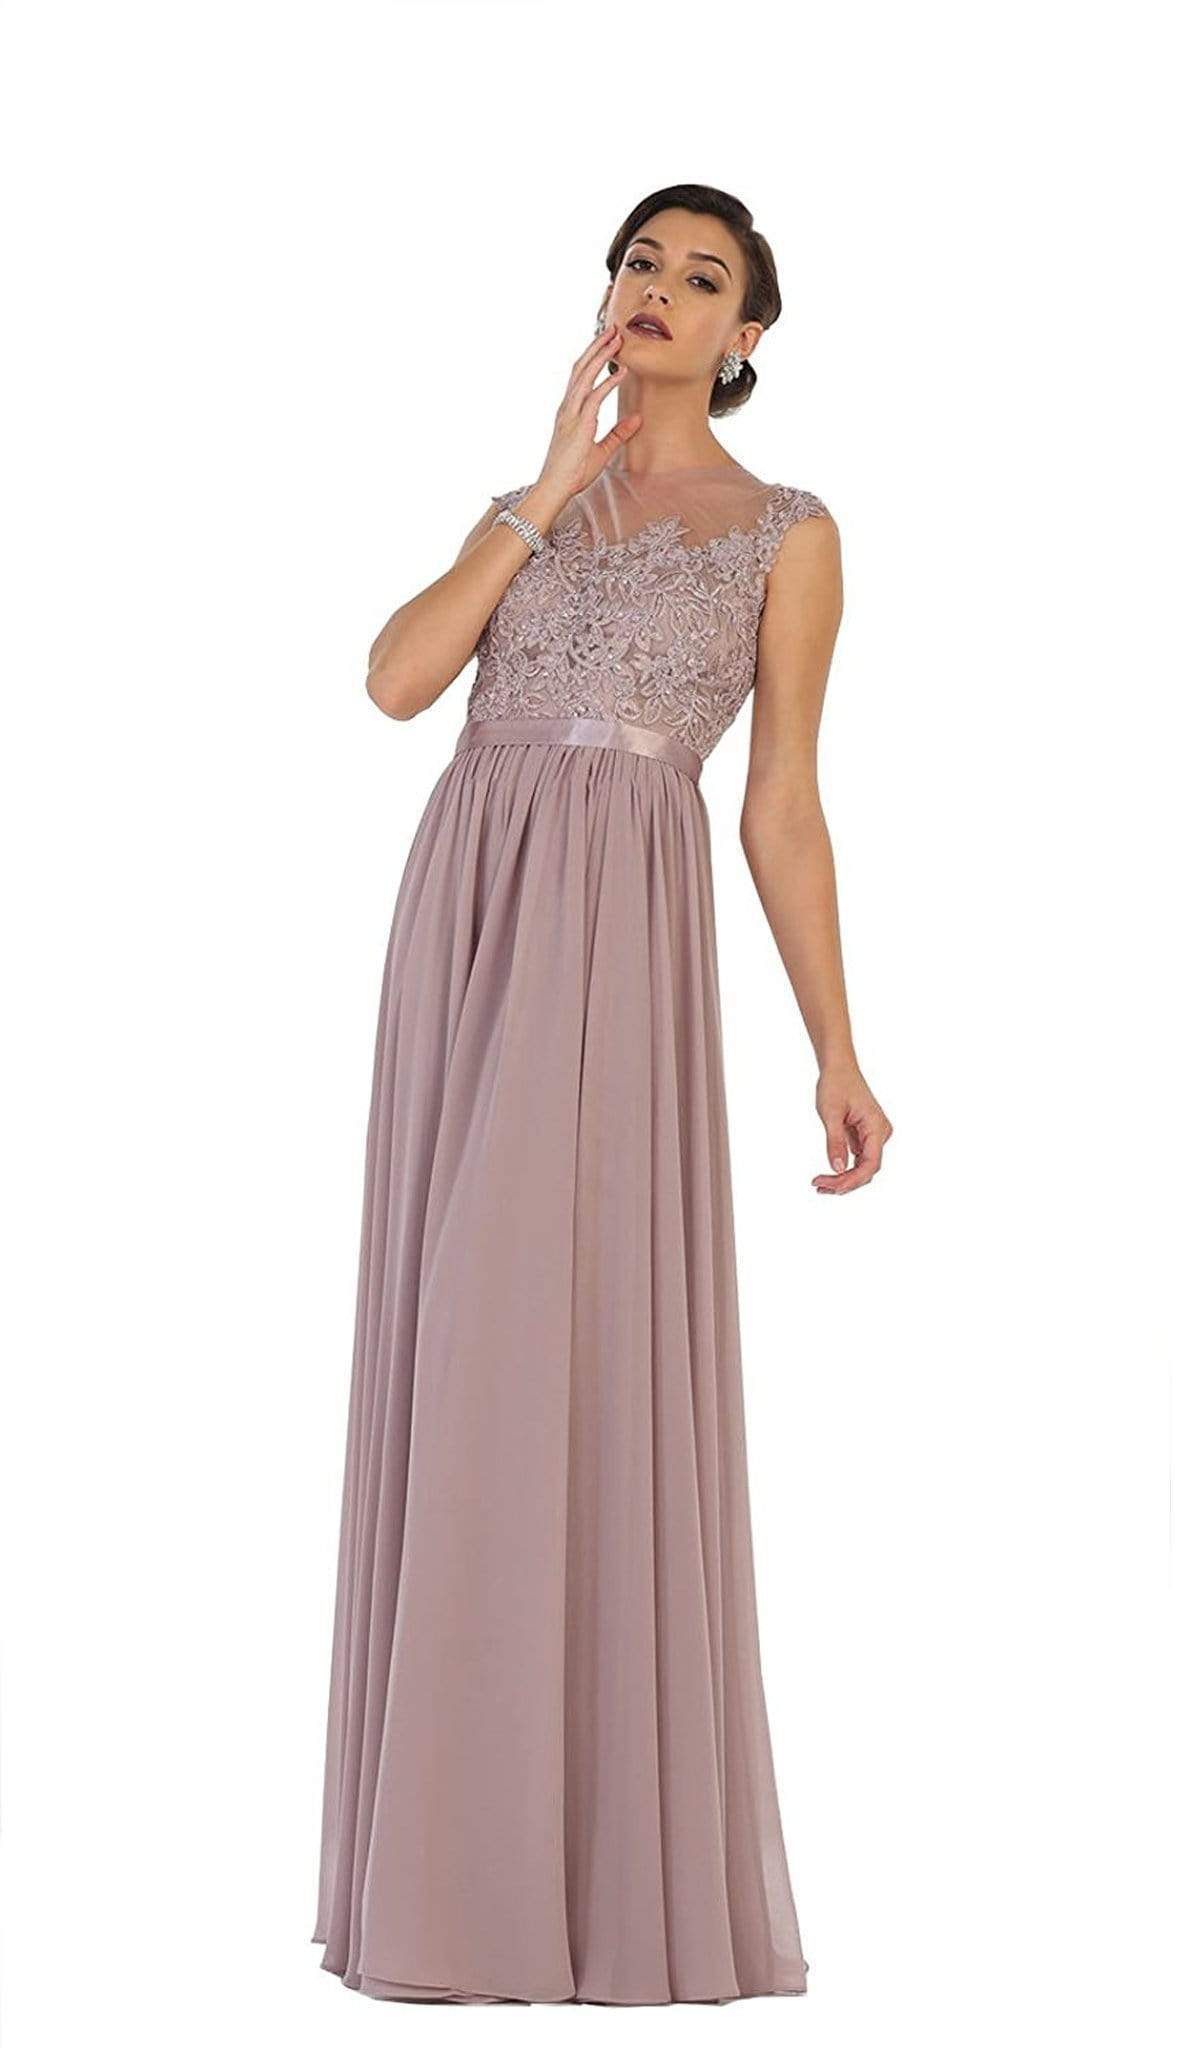 May Queen - Dainty Cap Sleeve Lace Applique Illusion Prom Gown Special Occasion Dress 22 / Mauve